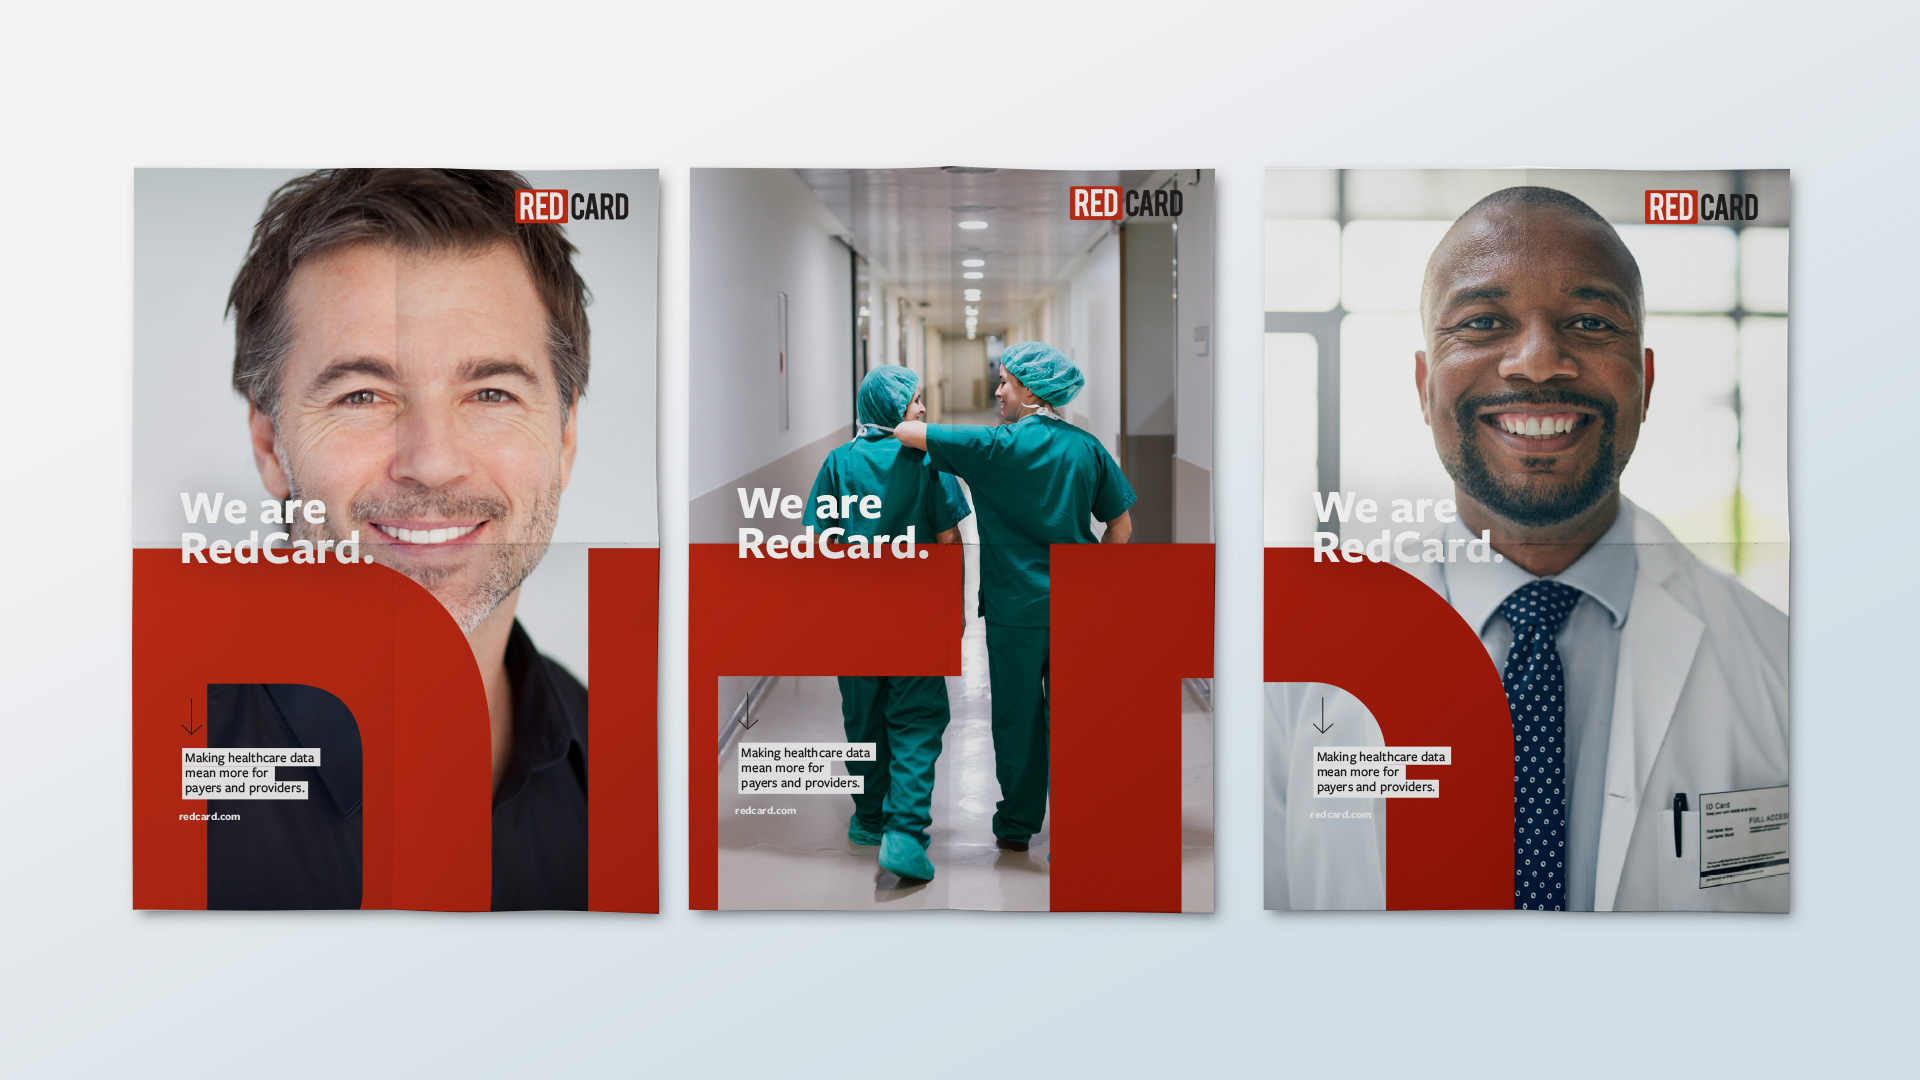 Poster design elements created for the health care marketing brand RedCard, by Atomicdust